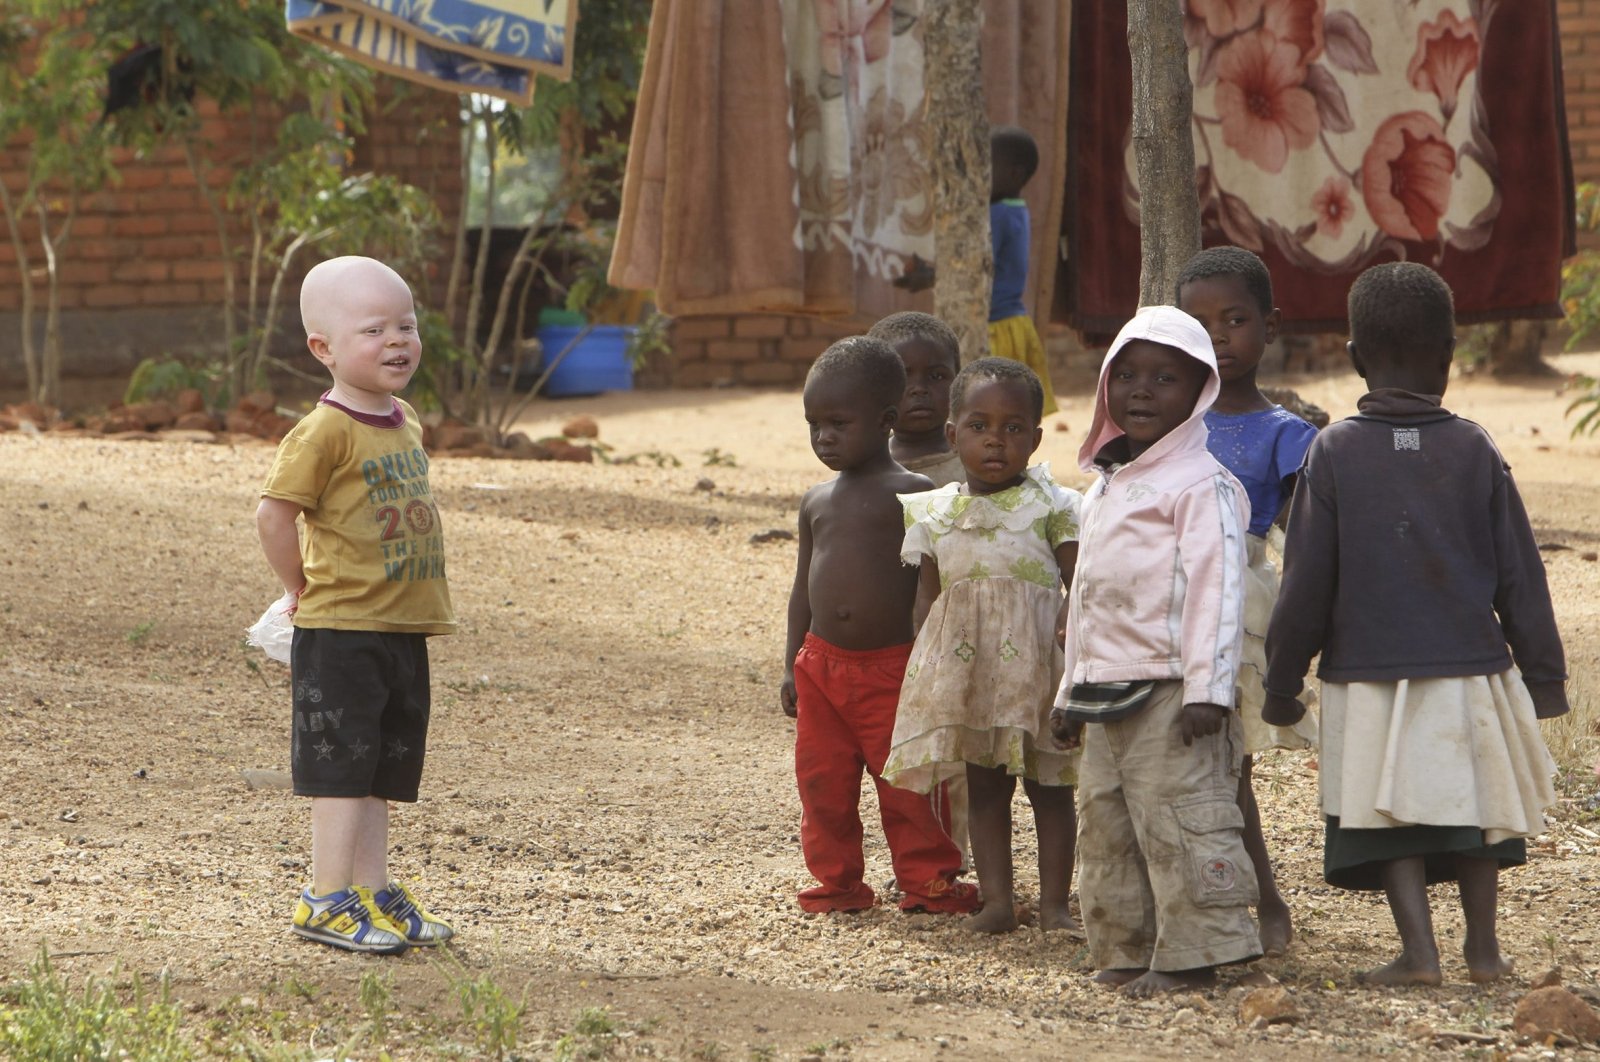 Cassim Jaffalie, 3, who has albinism, stands with his friends at their family home, in Machinga about 200 kilometers (125 miles) northeast of Blantyre, Malawi, May 23, 2016. (AP Photo)